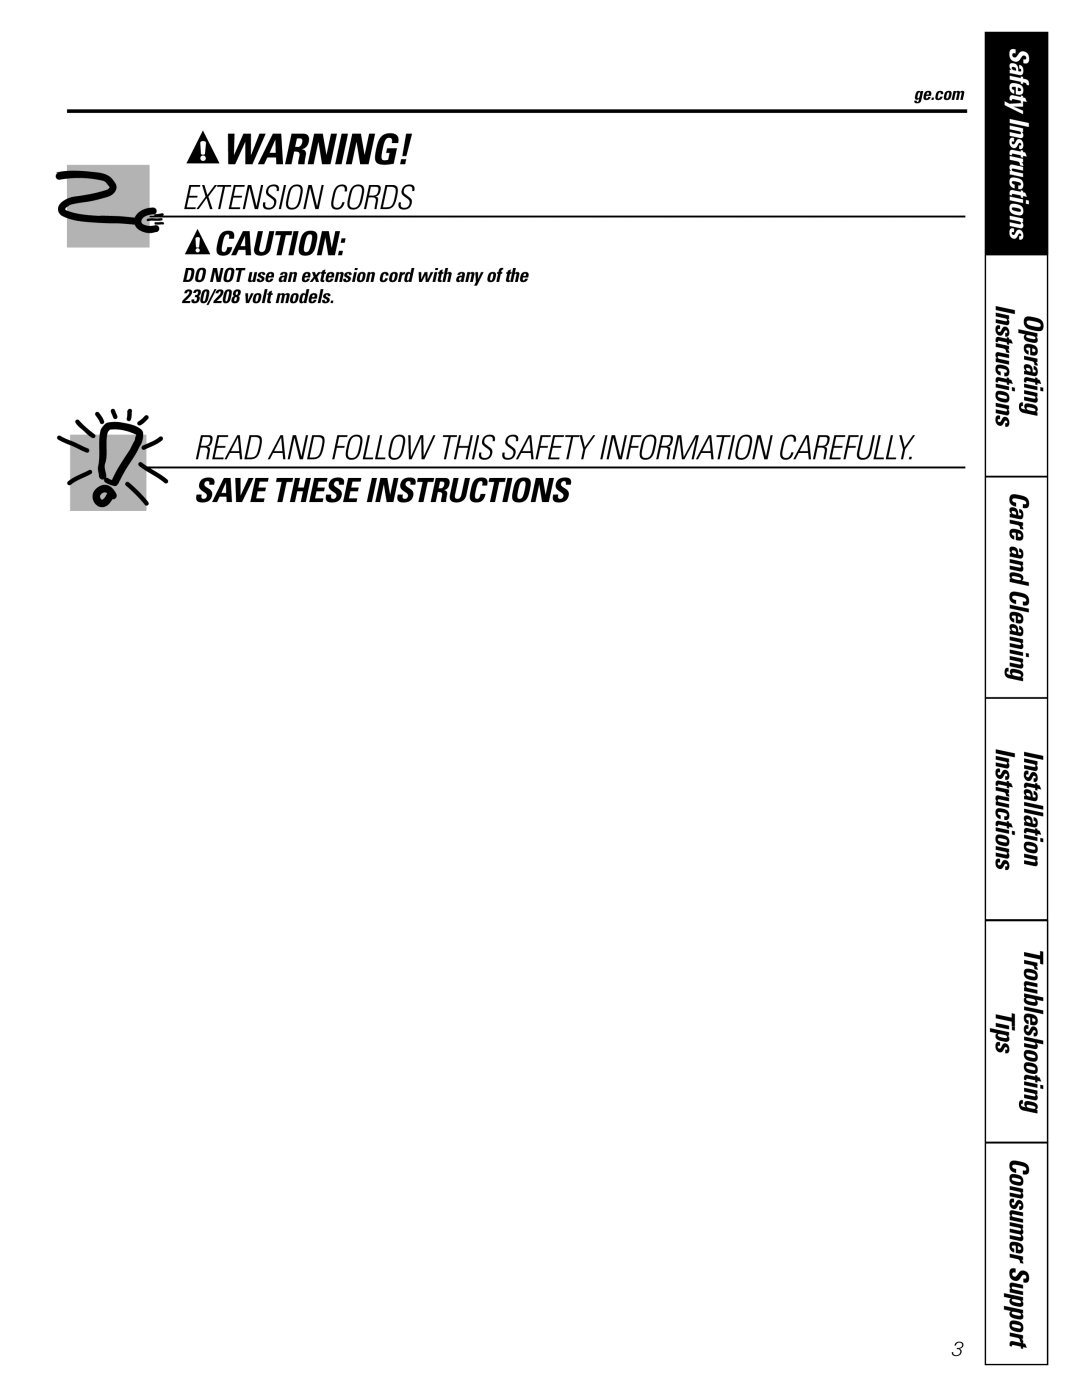 GE AEH18*, AEM25* Extension Cords, Save These Instructions, Installation, Troubleshooting, Operating, Safety Instructions 